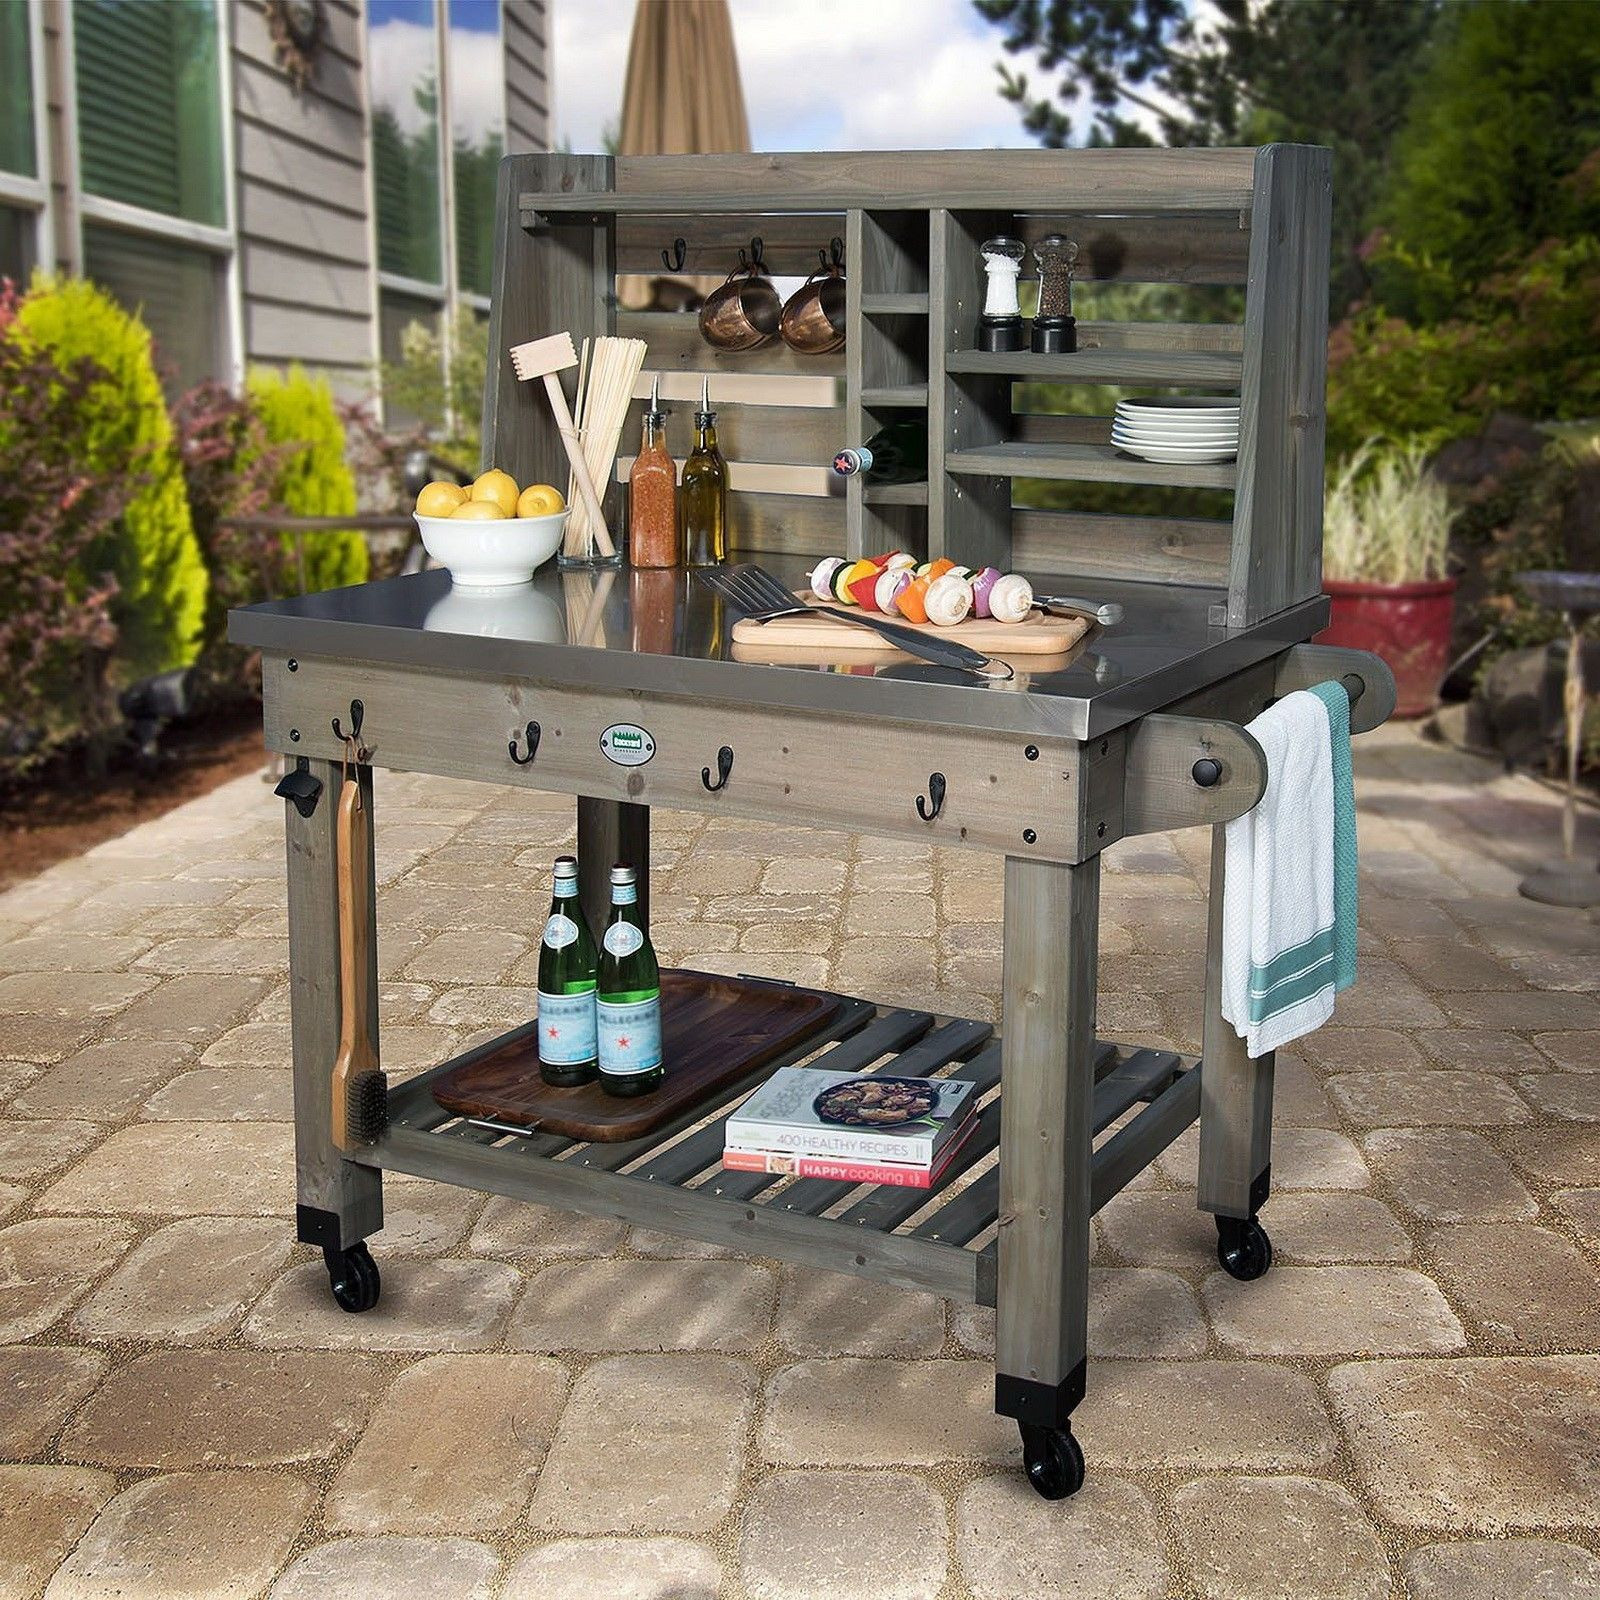 Outdoor Kitchen Prep Station
 New Rolling Outdoor Kitchen Grill Prep Work Station Mobile